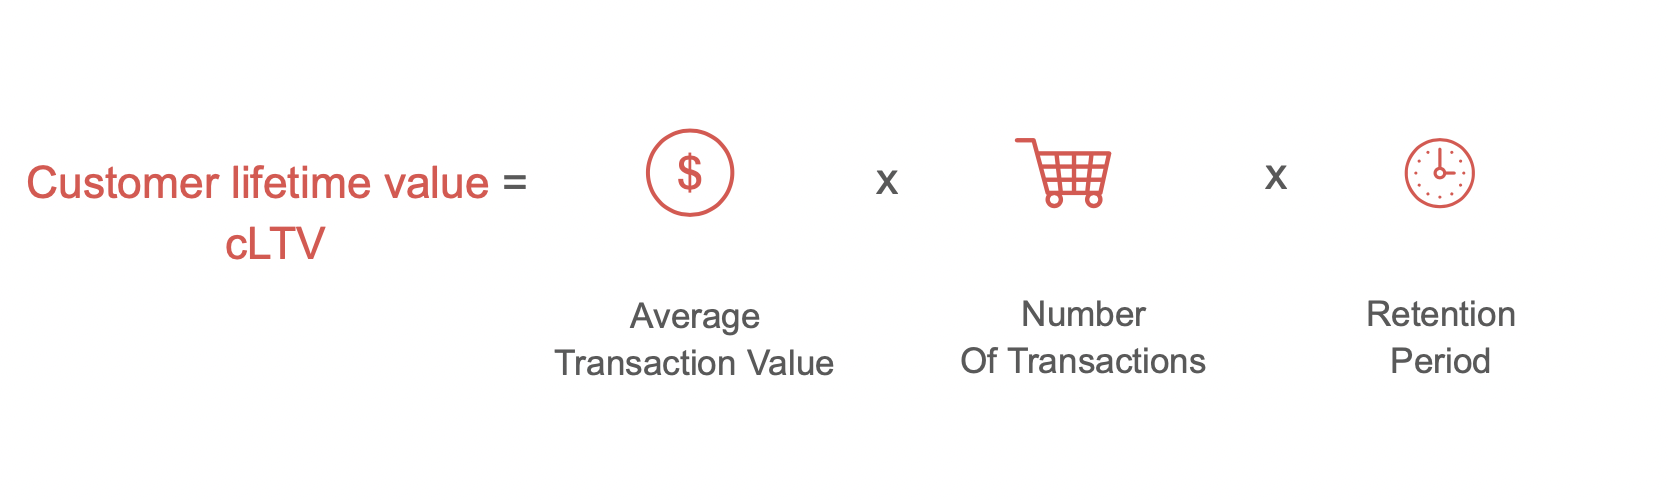 How To Calculate Customer Lifetime Value? 